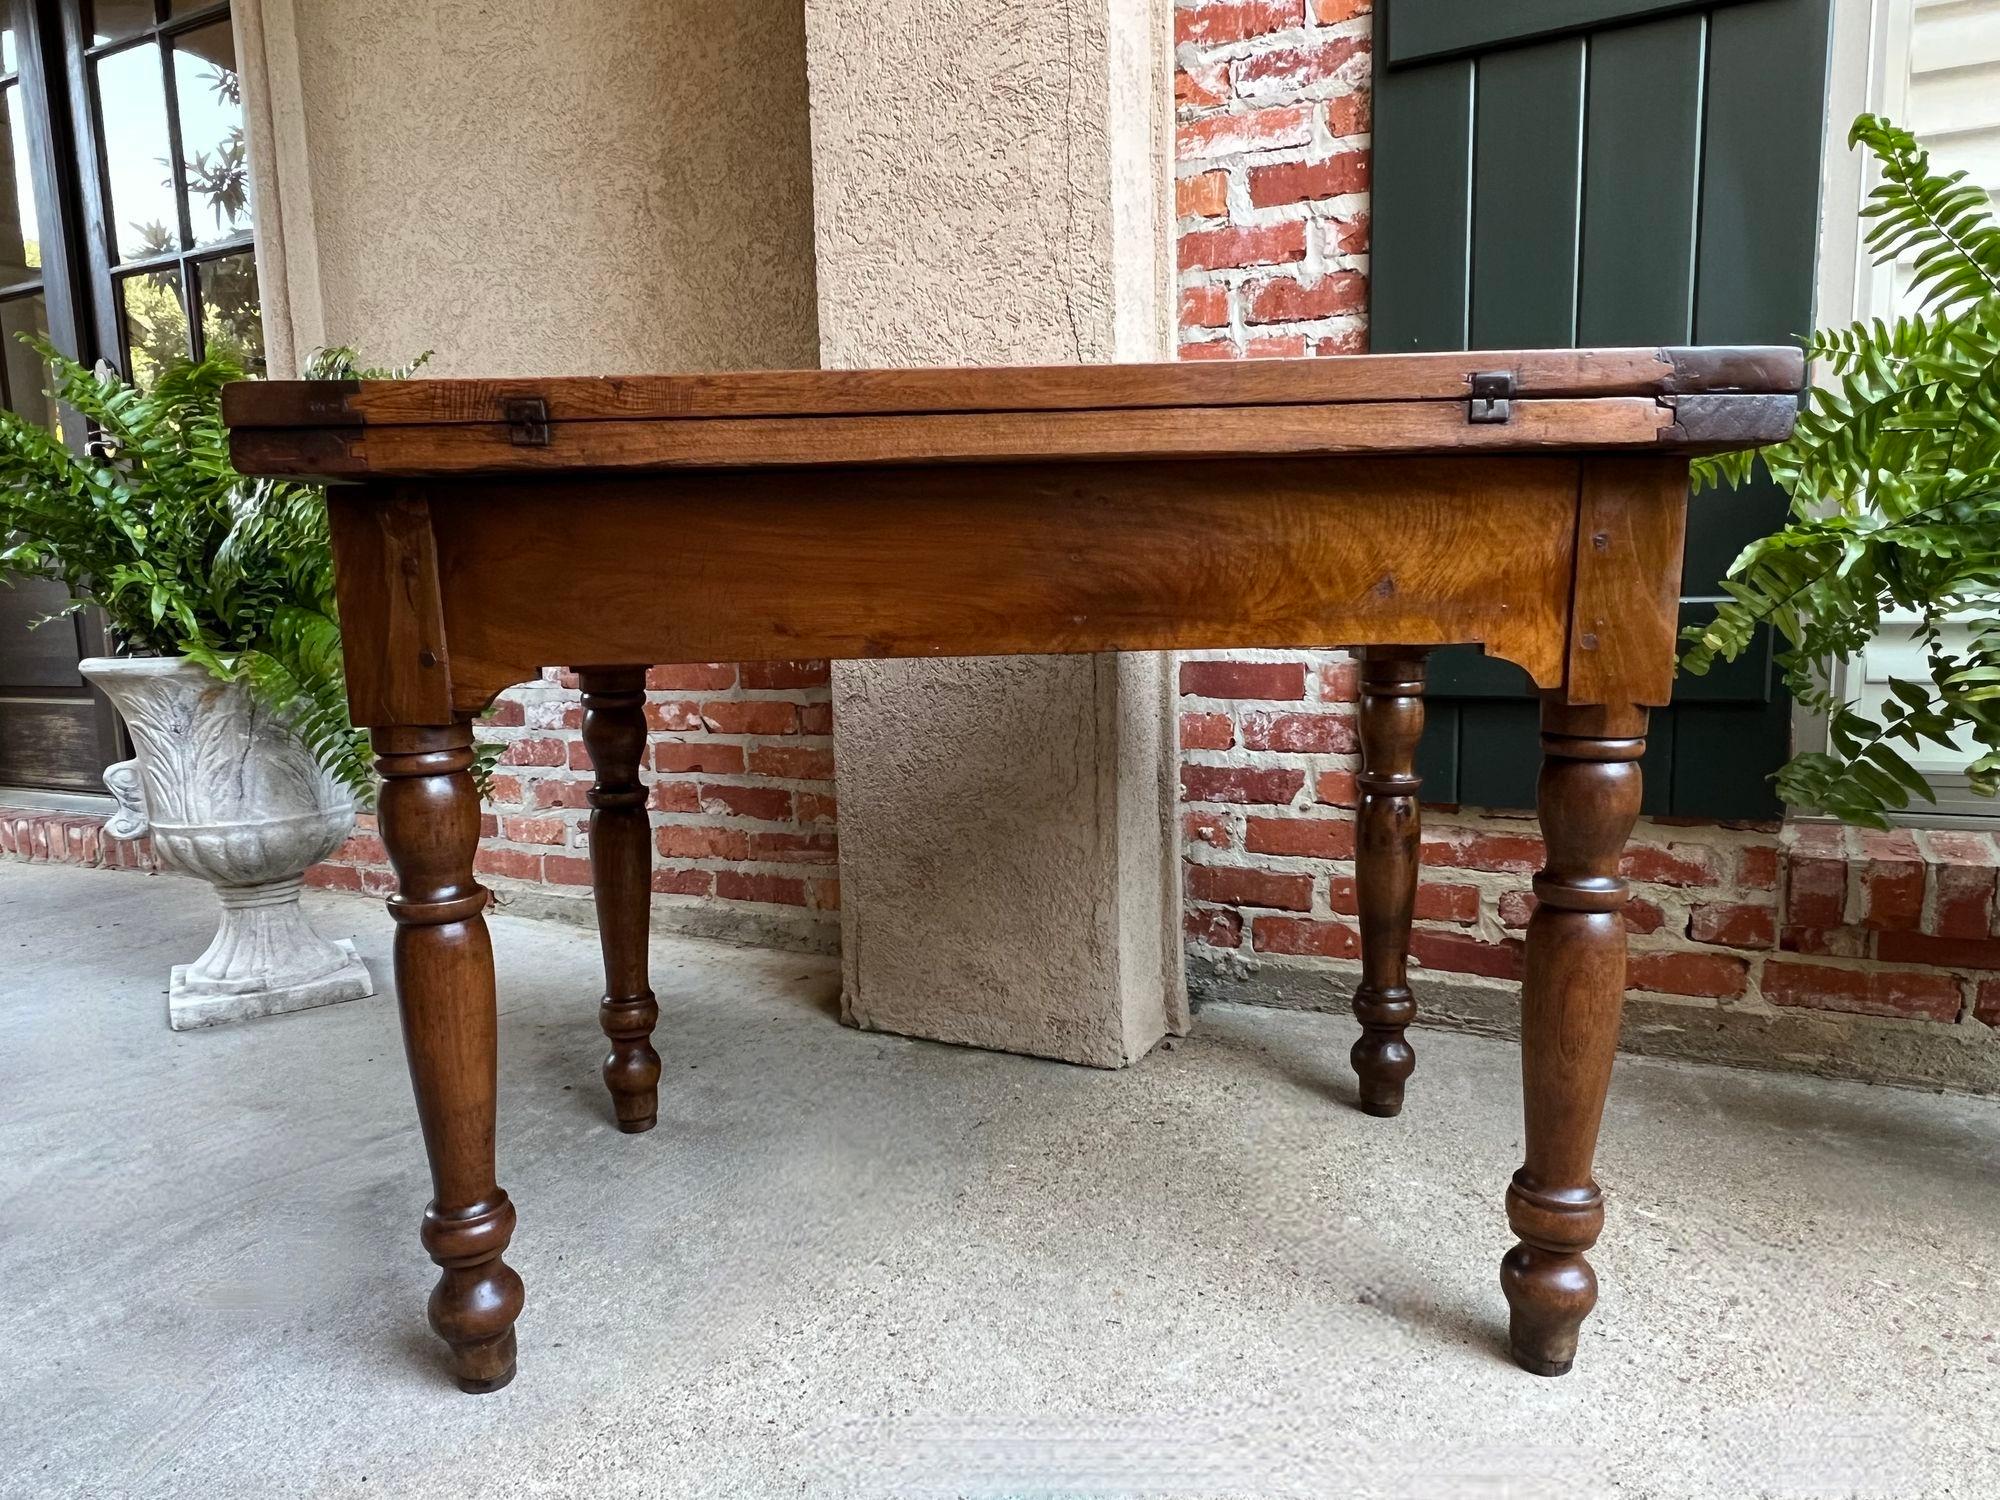 Antique Italian Kitchen Farm Table Island Walnut Flip Top Game Table circa1800.

Direct from Italy, an extraordinary antique “flip top” table, that was likely originally used as a baker or kitchen table/island. Solid walnut, stunning aged patina,